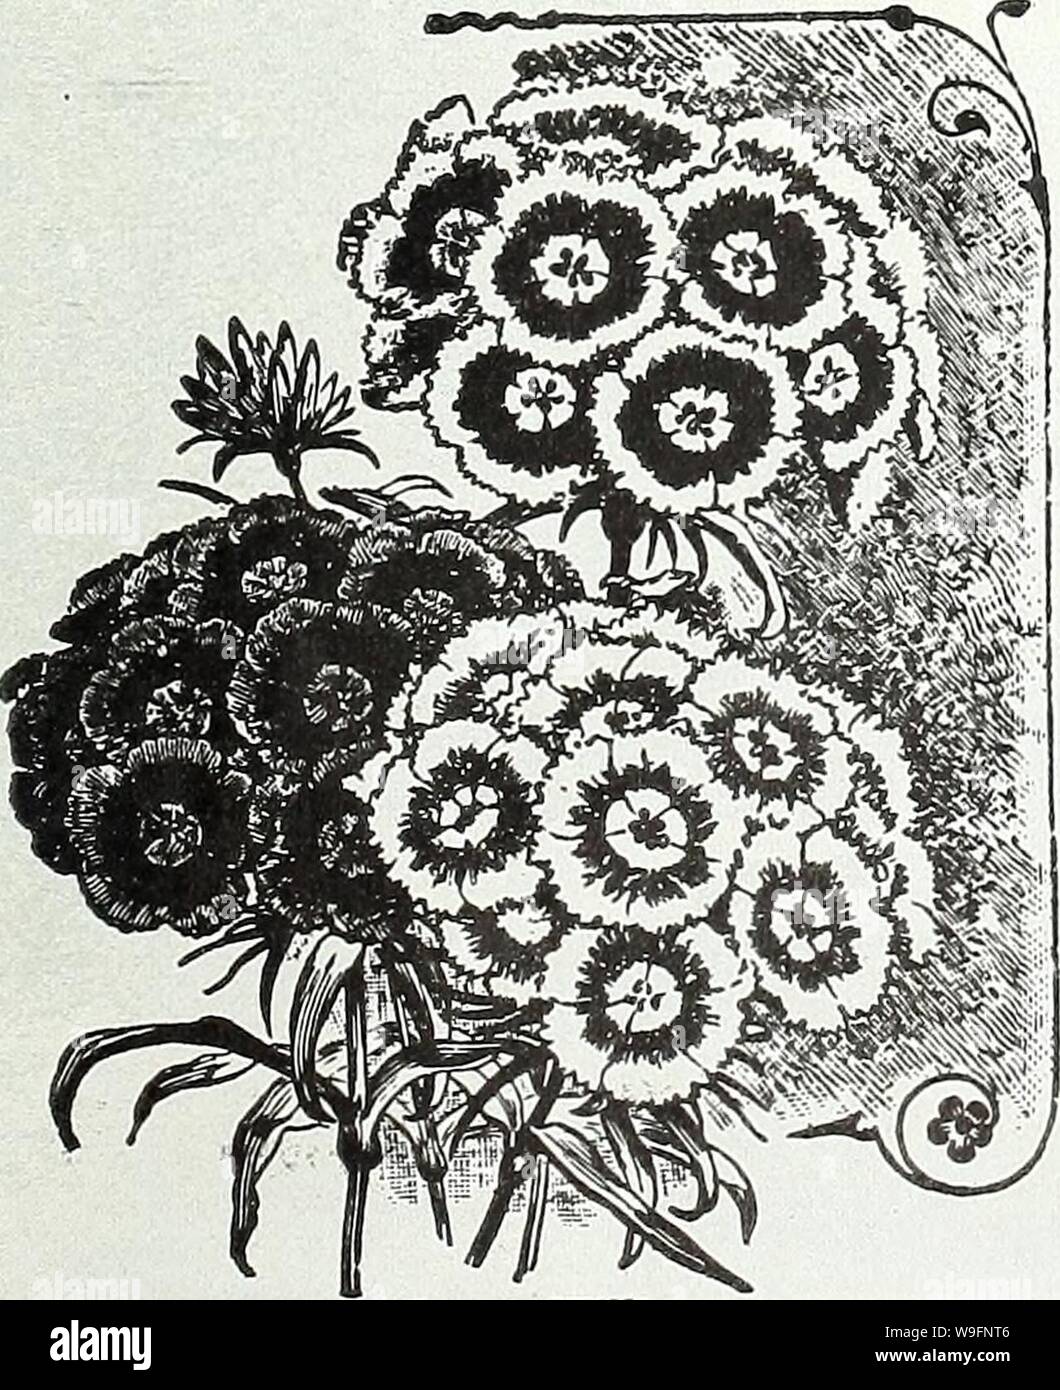 Archive image from page 58 of Currie's garden annual  spring,. Currie's garden annual : spring, 1935 60th year  curriesgardenann19curr 1 Year: 1935 ( CURRIE BROTHERS CO., MILWAUKEE, WIS. Page S5 STATICE (Sea Lavender) LATIFOLIA—A valuable border plant with tufts of leathery leaves and large heads of purplish-blue flow- ers. Plants, price, each, 25c; per doz., $2.50; seeds Pkt. 10c DUMOSA—Forms densely packed cushions of silvery gray flowers. The stems are stiff and wiry, the panicles are thickly covered with blossoms. 2 ft. Seeds, Pkt. 25c STOKESIA (Cornflower or Stokes' Aster) Plants grow abo Stock Photo